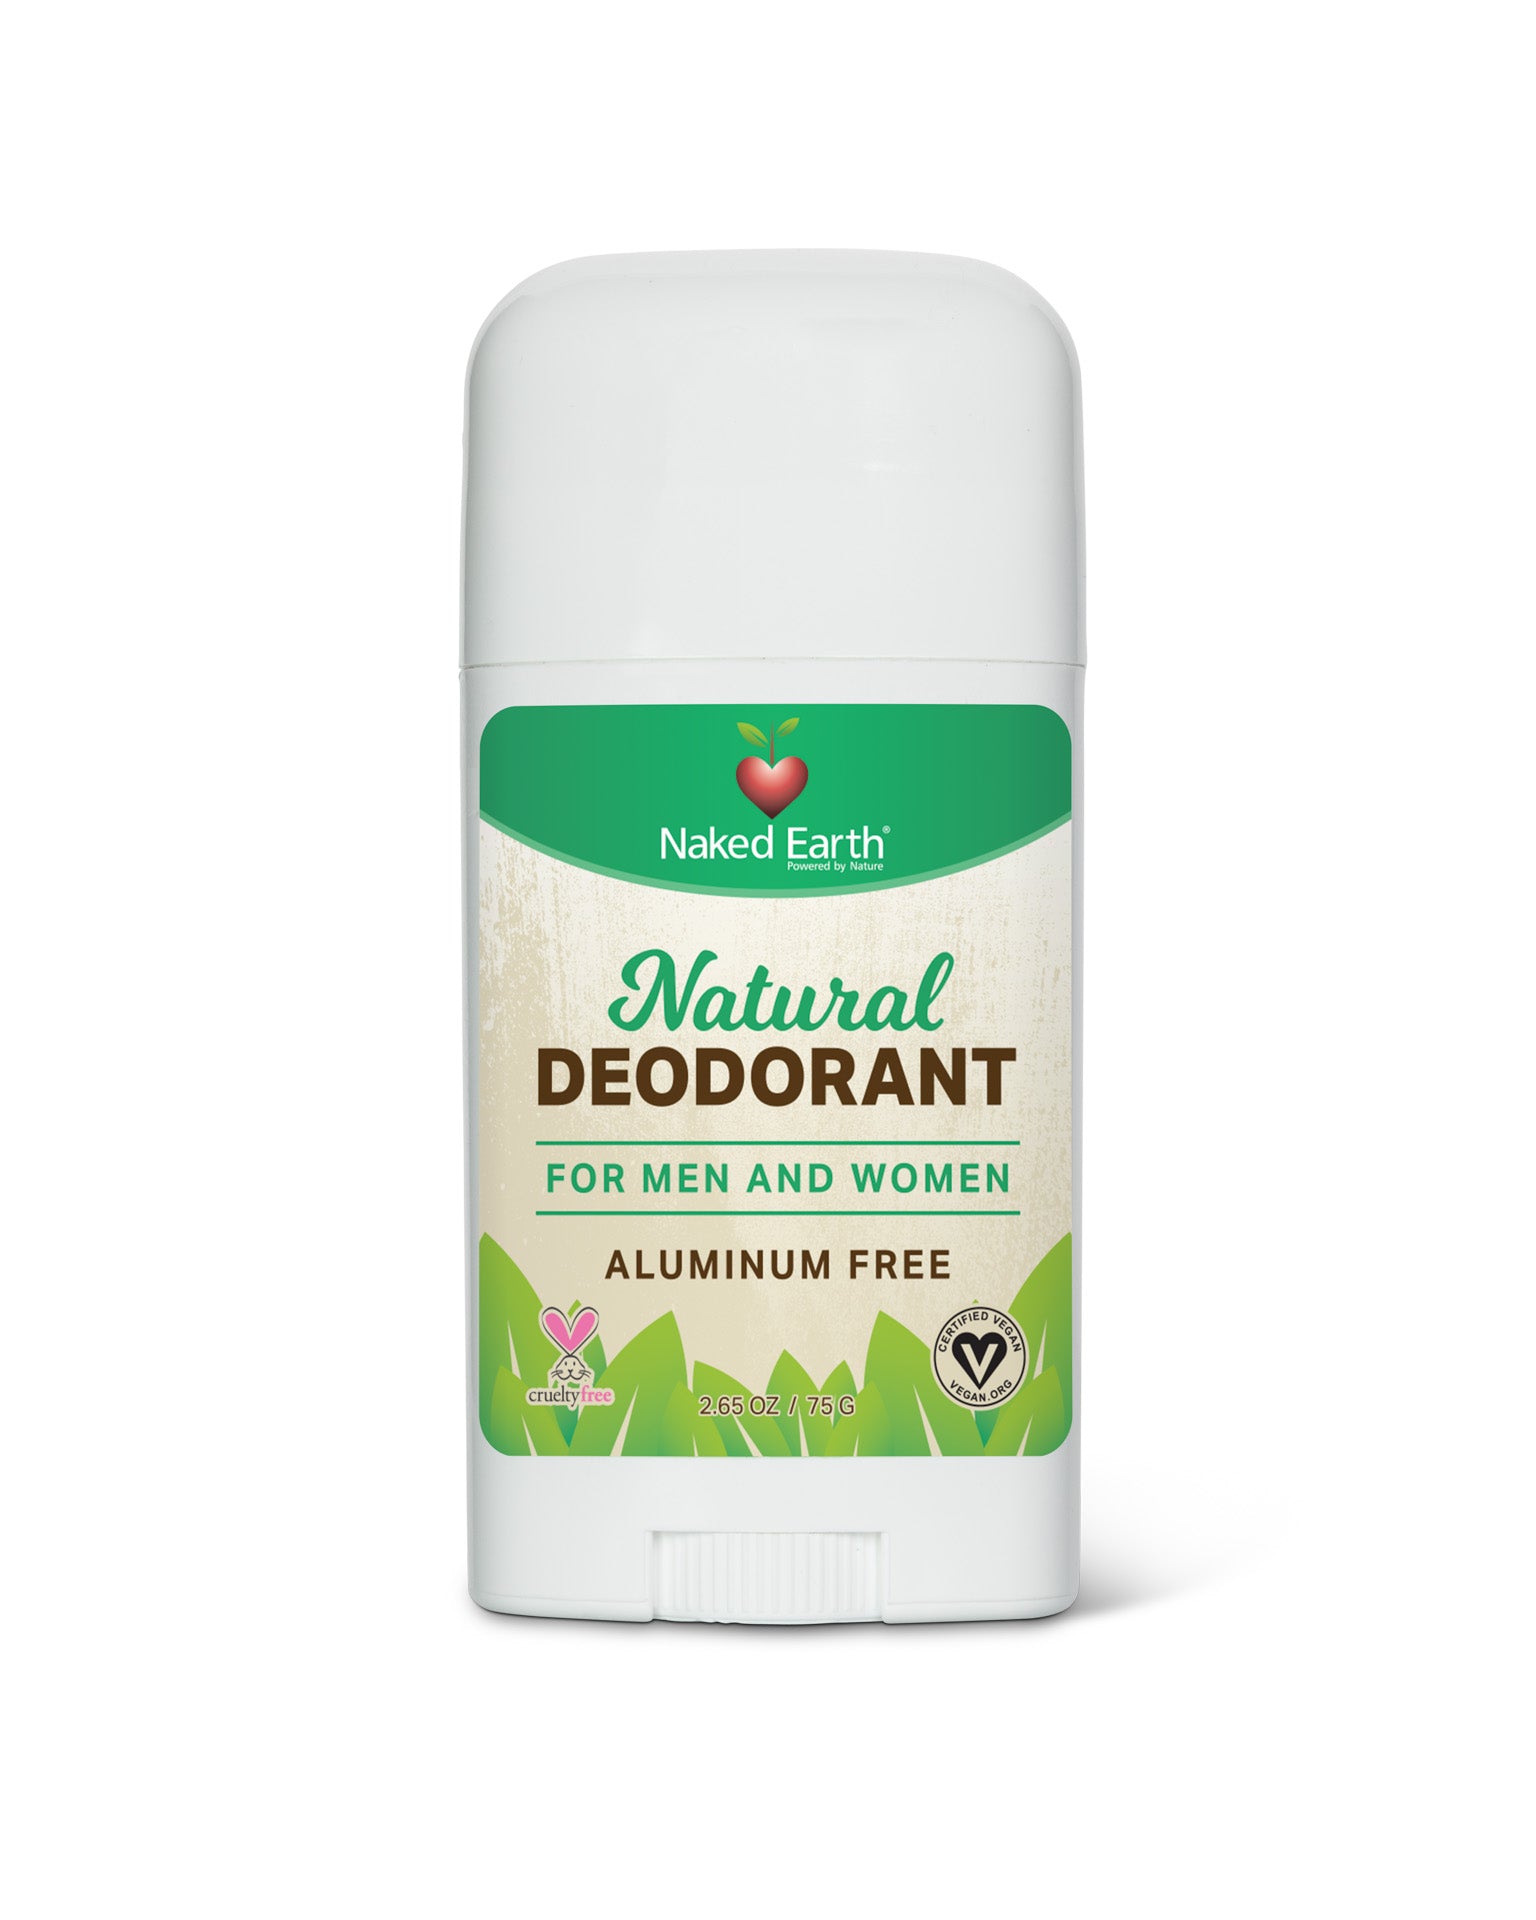 Naked Earth's Deodorant for and Women